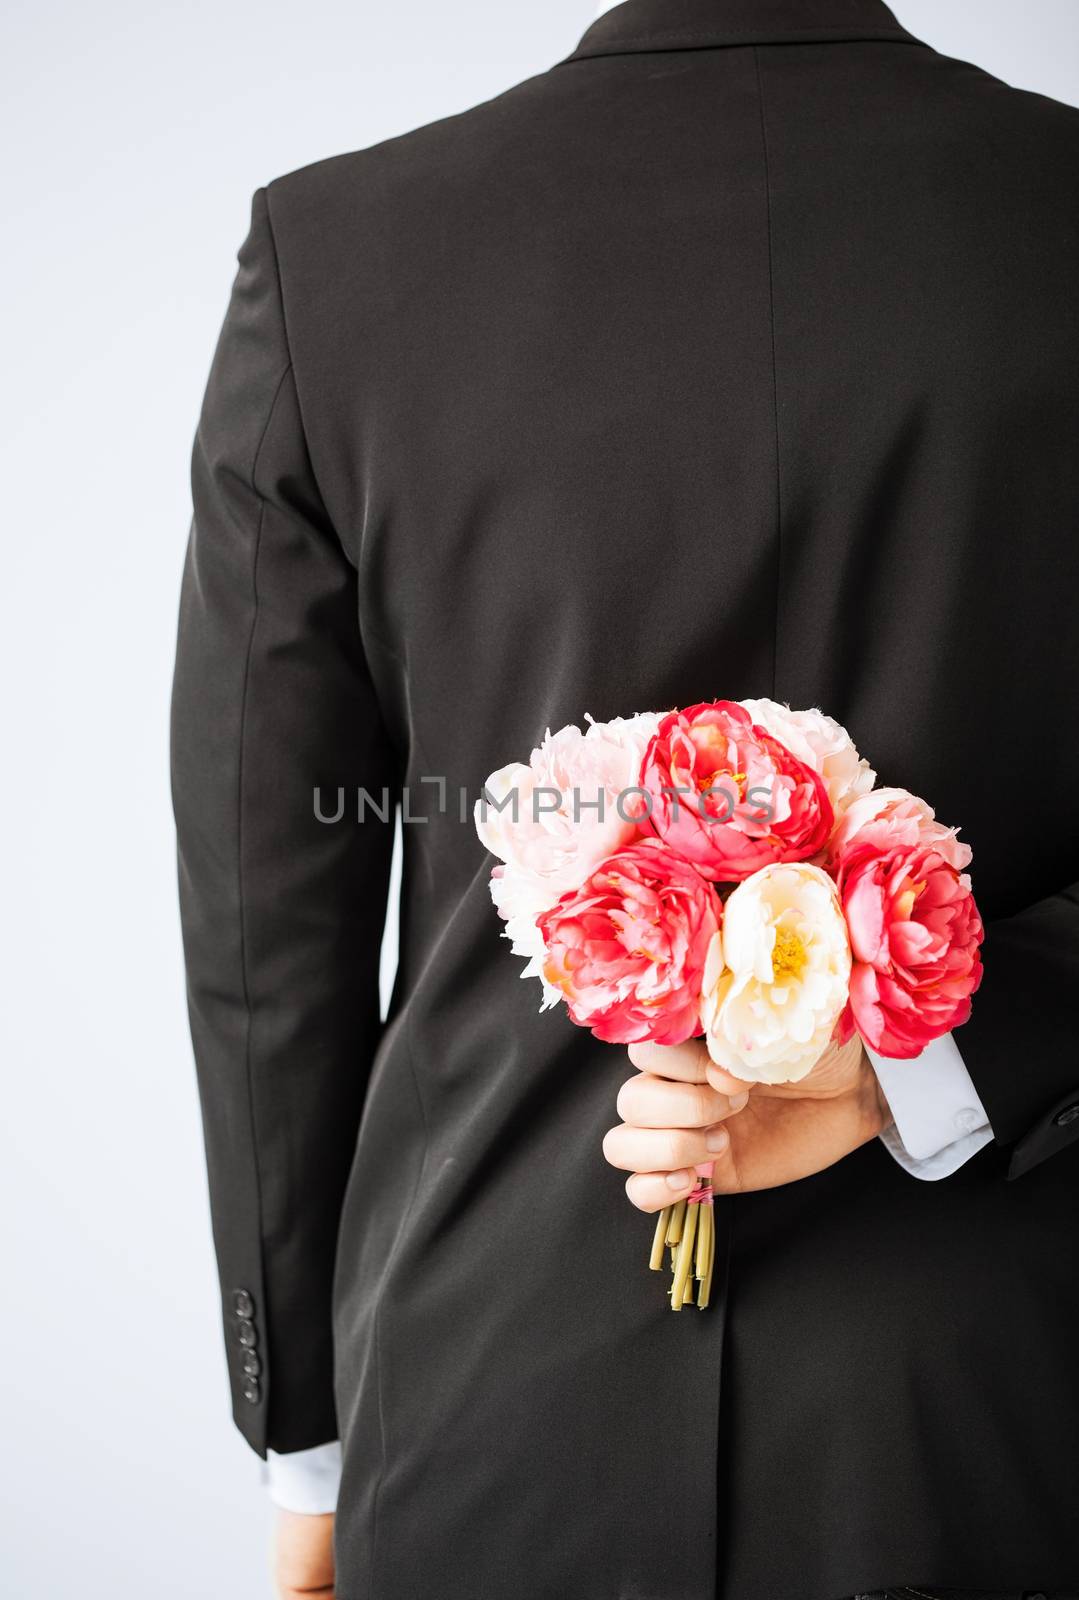 man hiding bouquet of flowers behind his back.